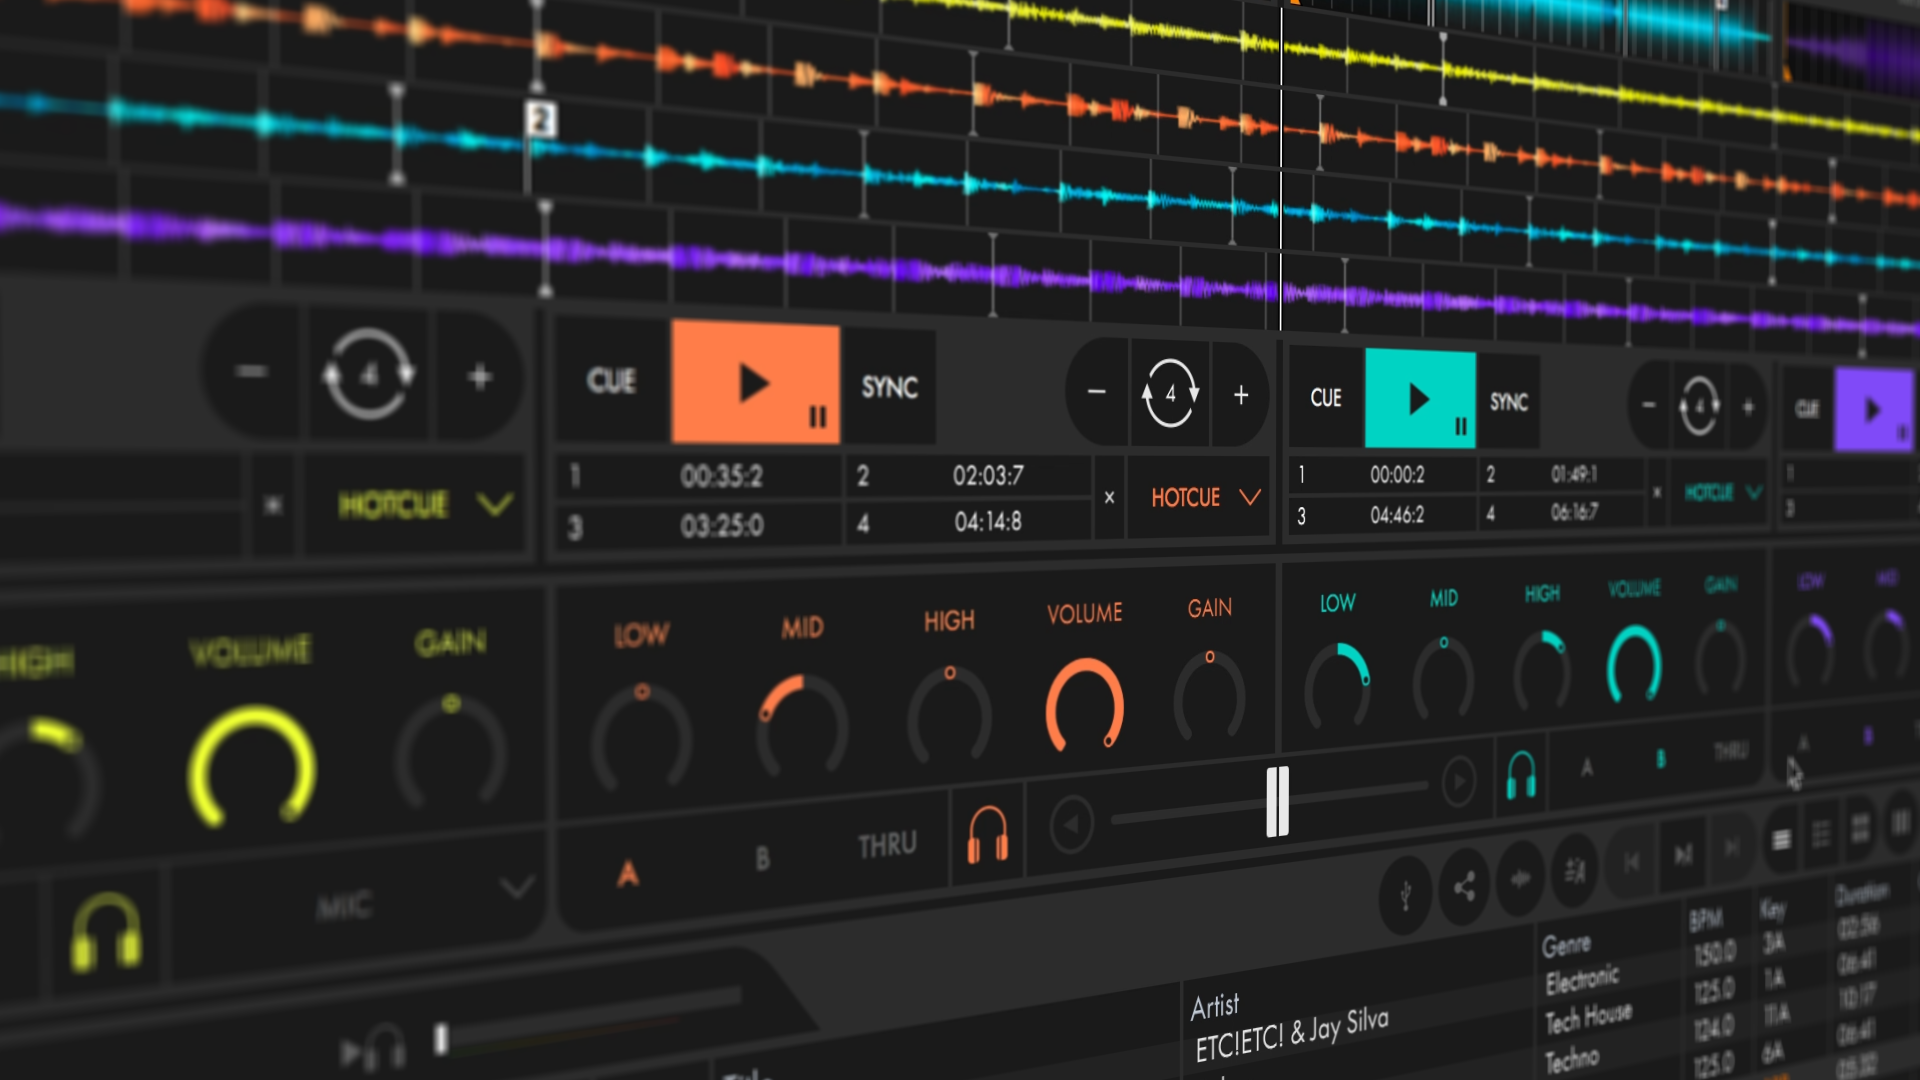 Mixvibes Cross DJ 4 Launched, Brings New Customisable Interface